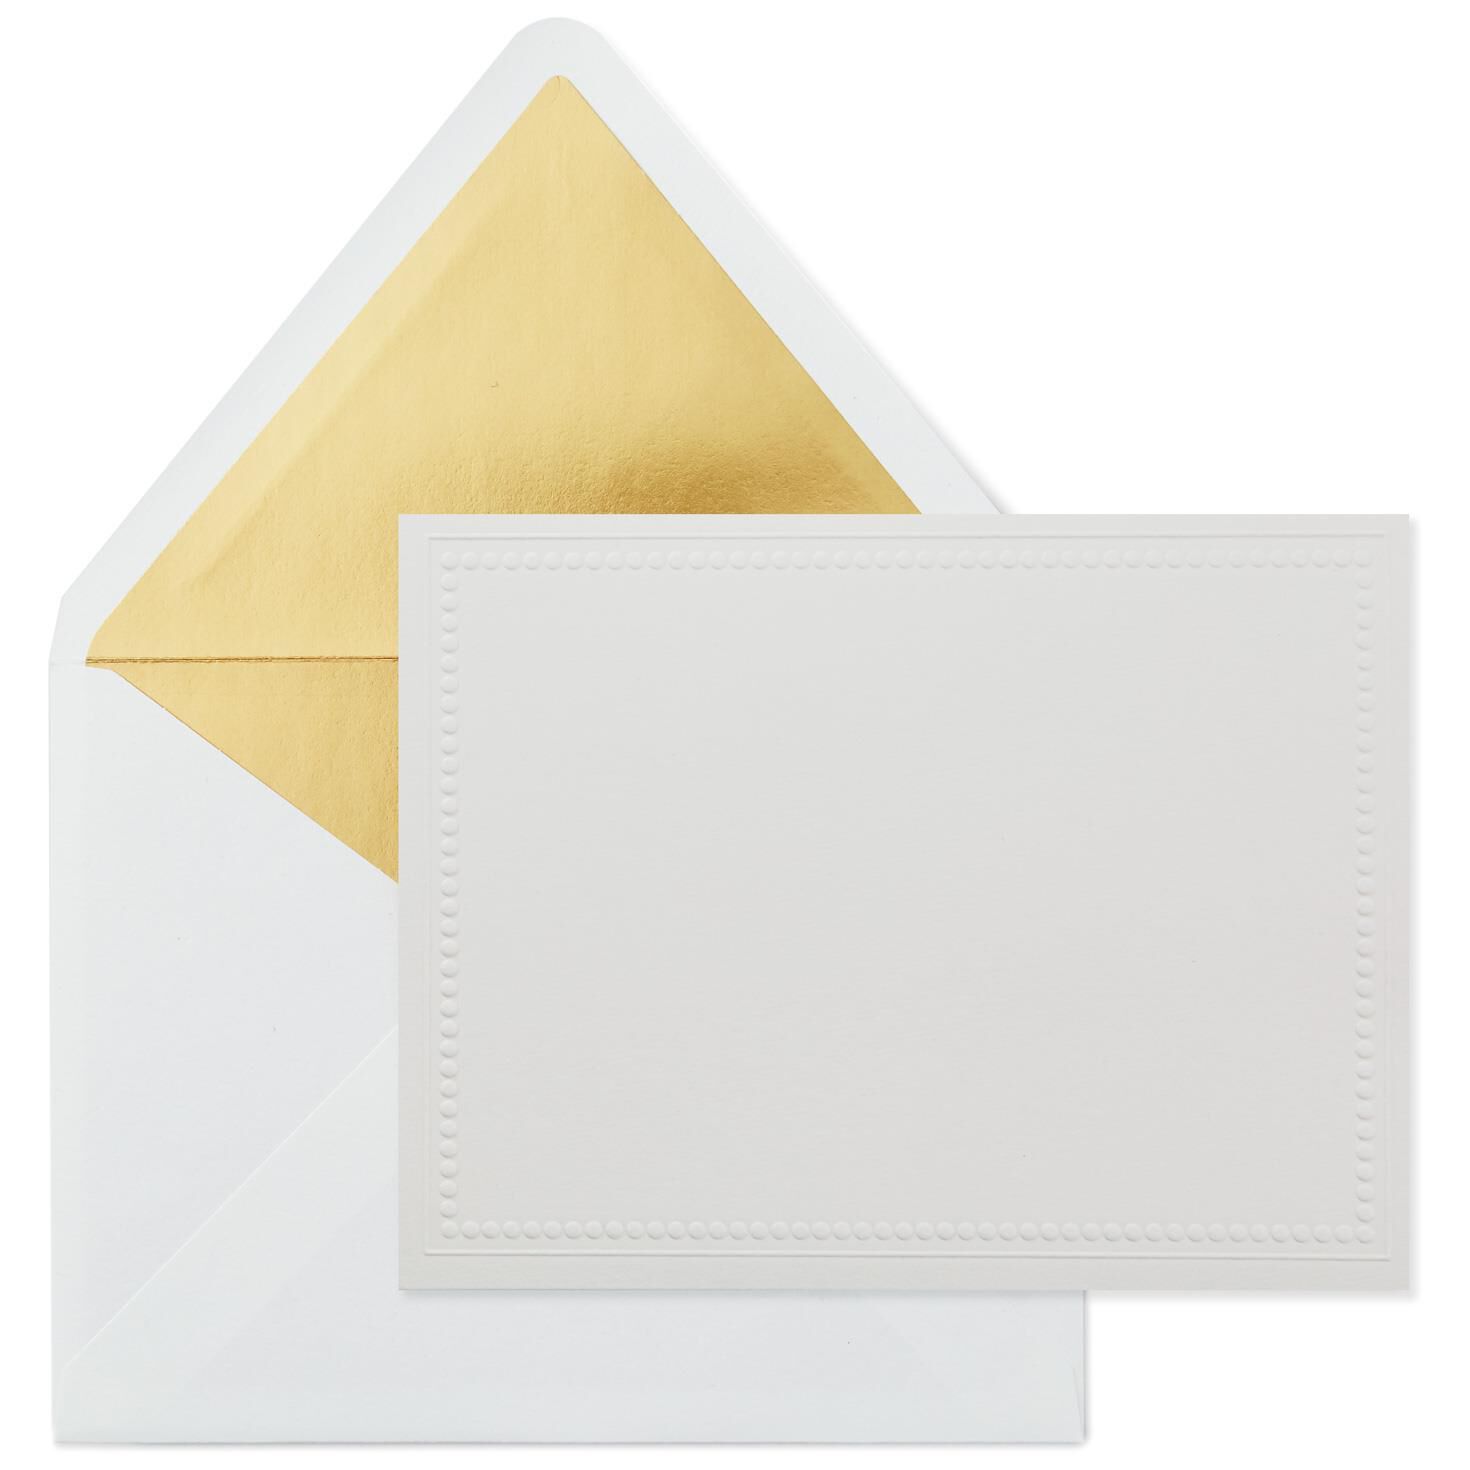 Embossed Beaded Border Blank Note Cards, Box of 10 - Note Cards - Hallmark